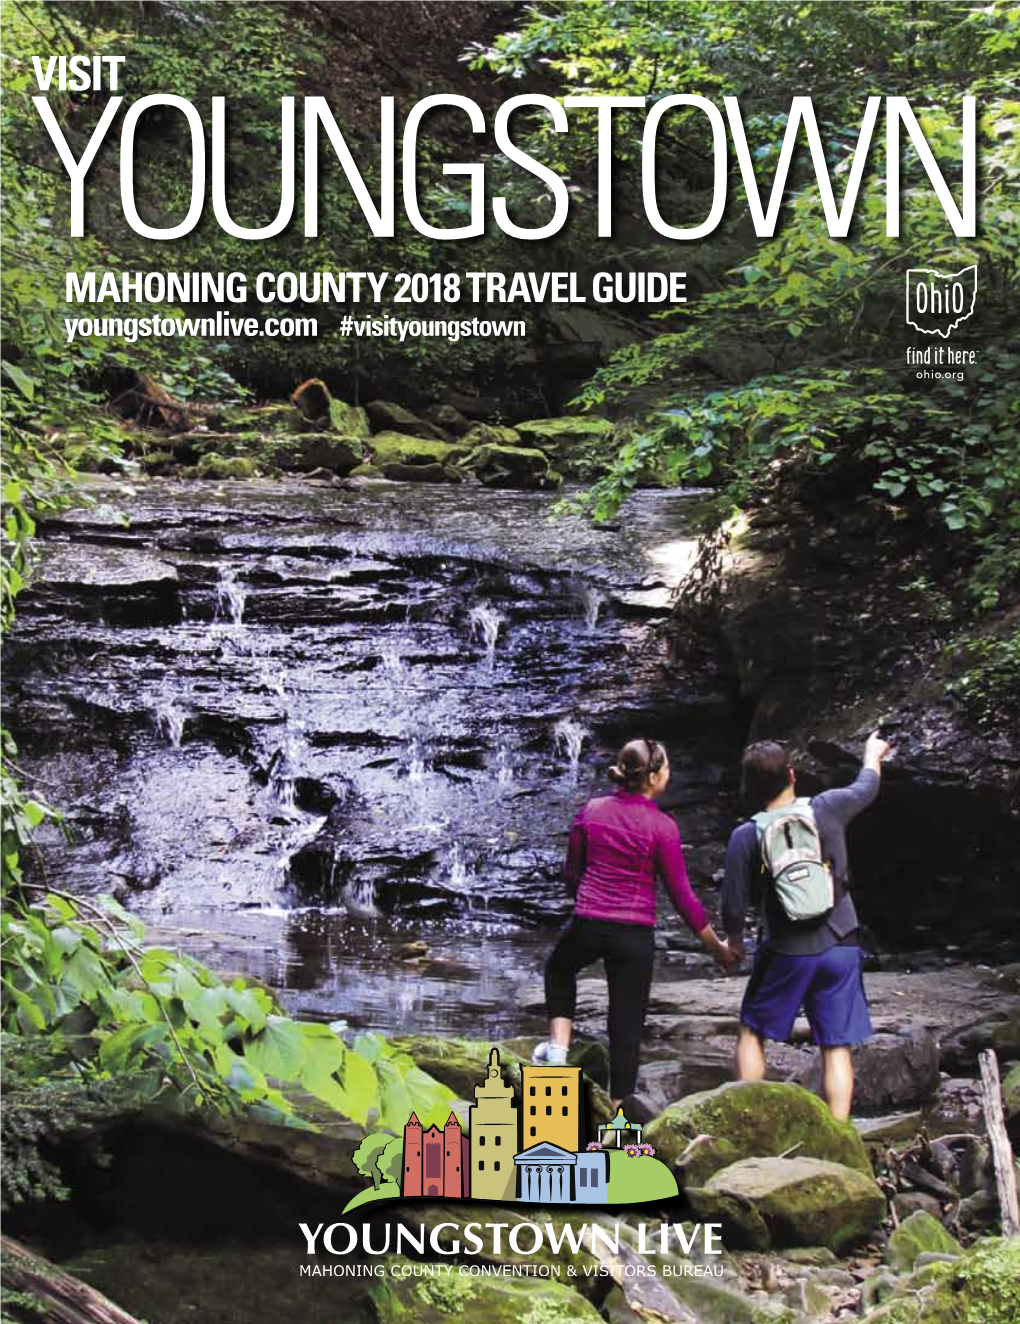 Mahoning County 2018 Travel Guide